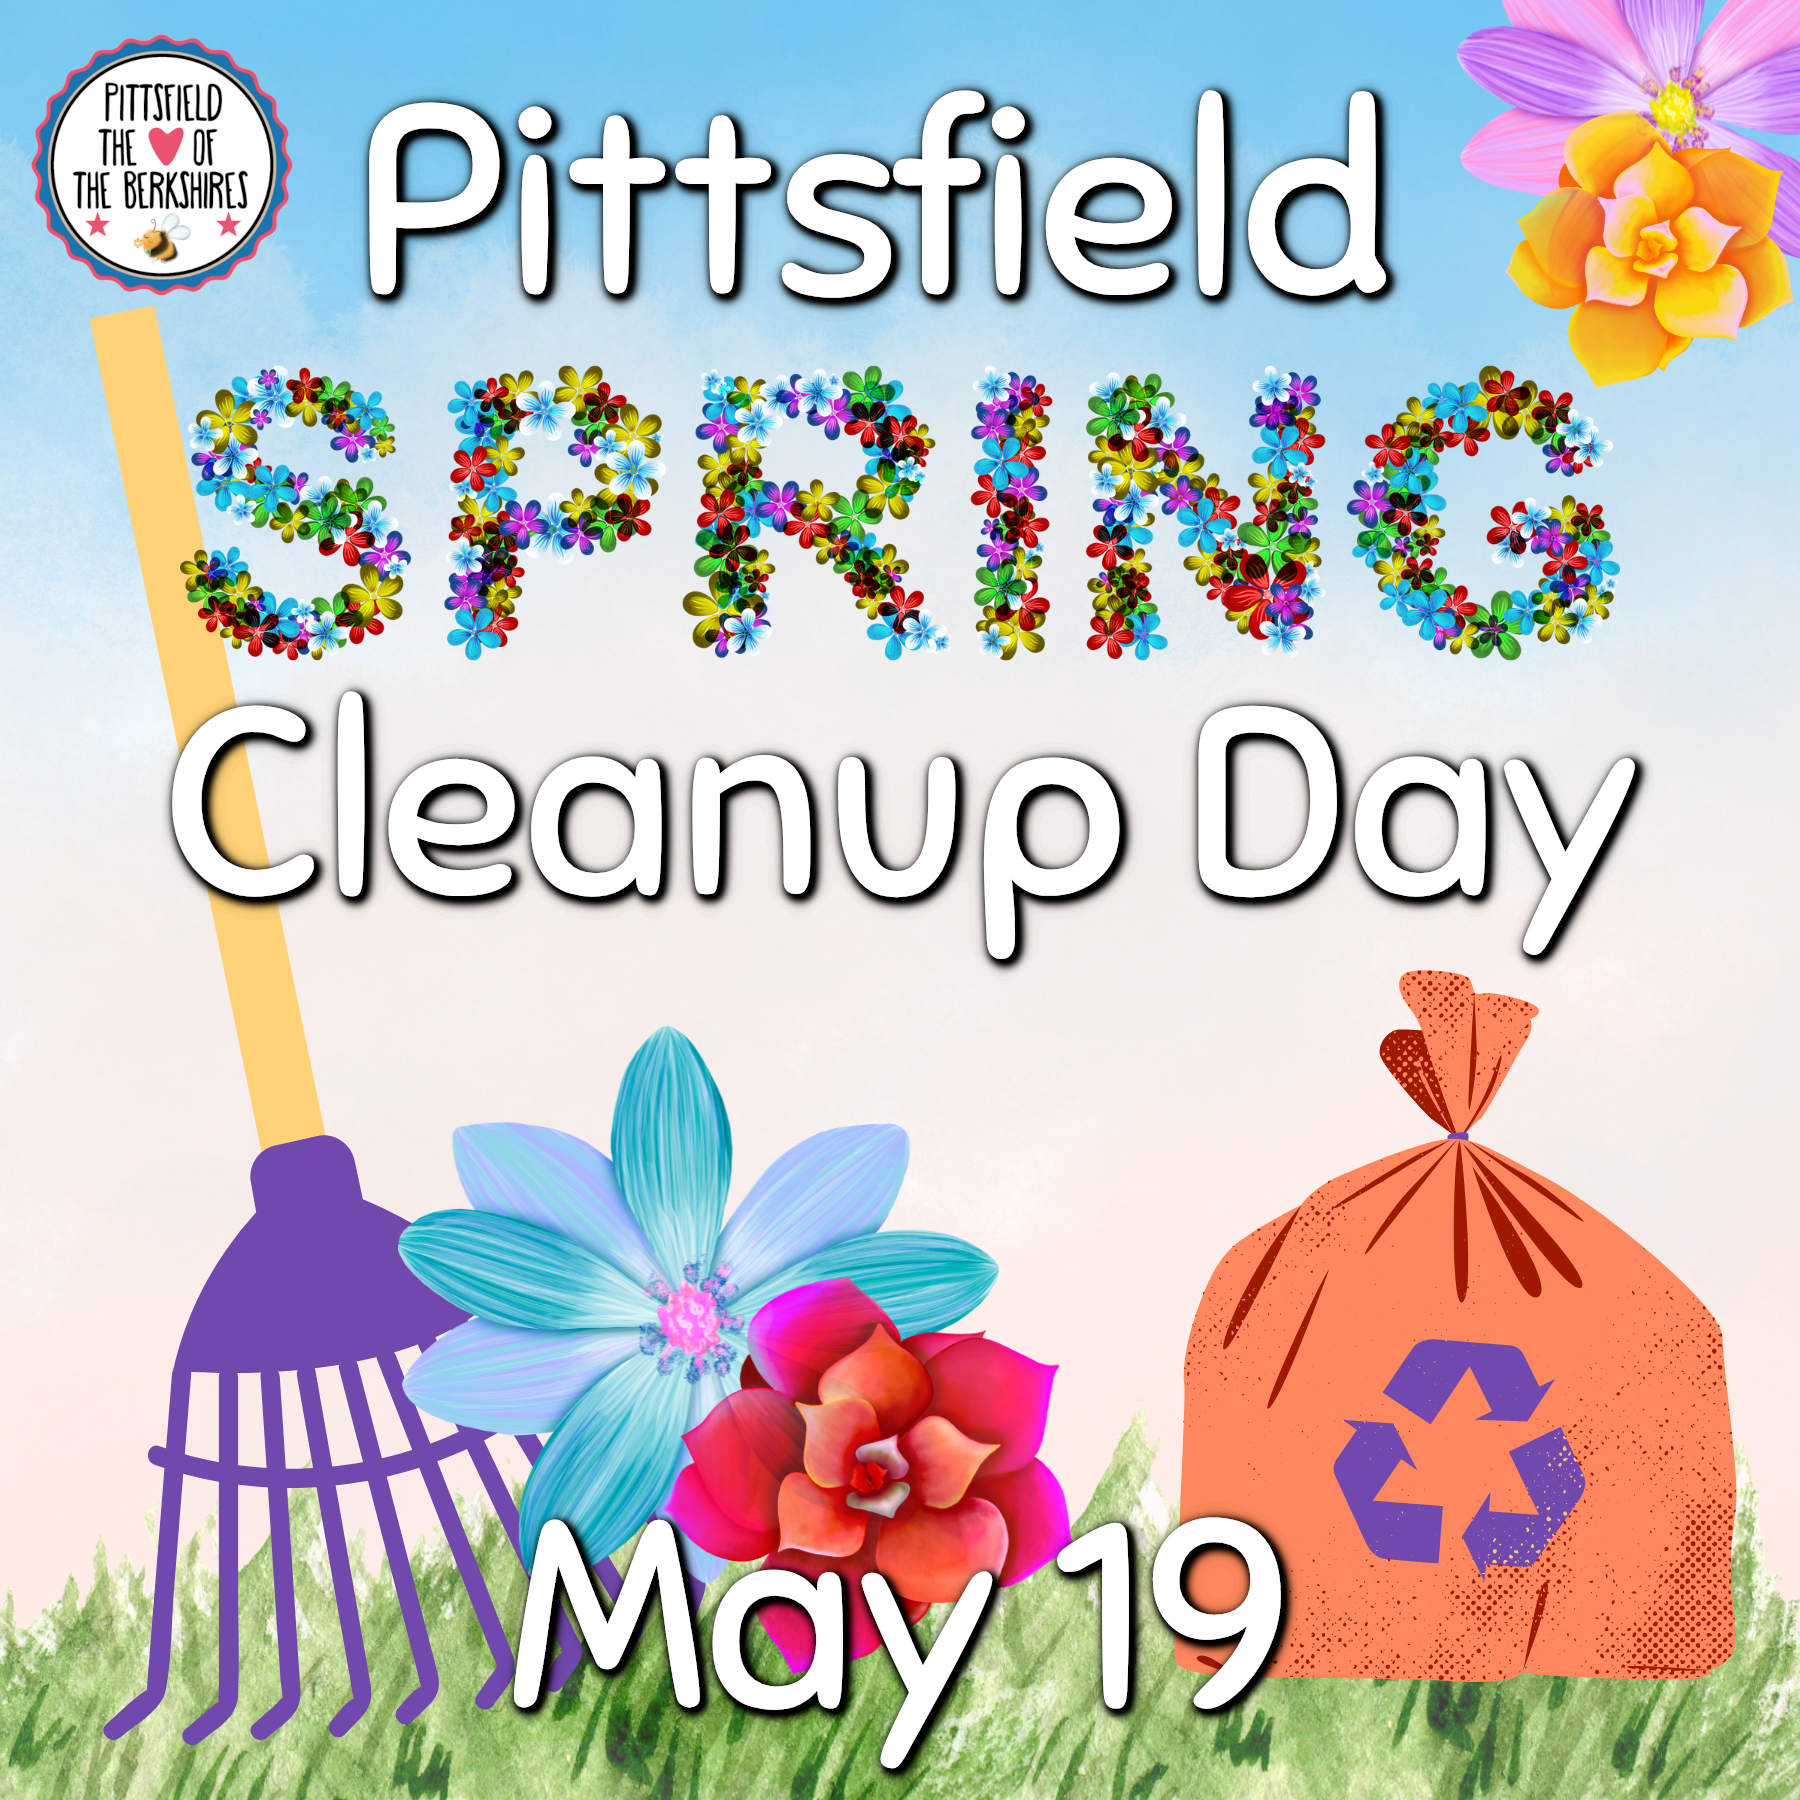 Downtown Pittsfield Spring Cleanup and Pittsfield Cleanup Day